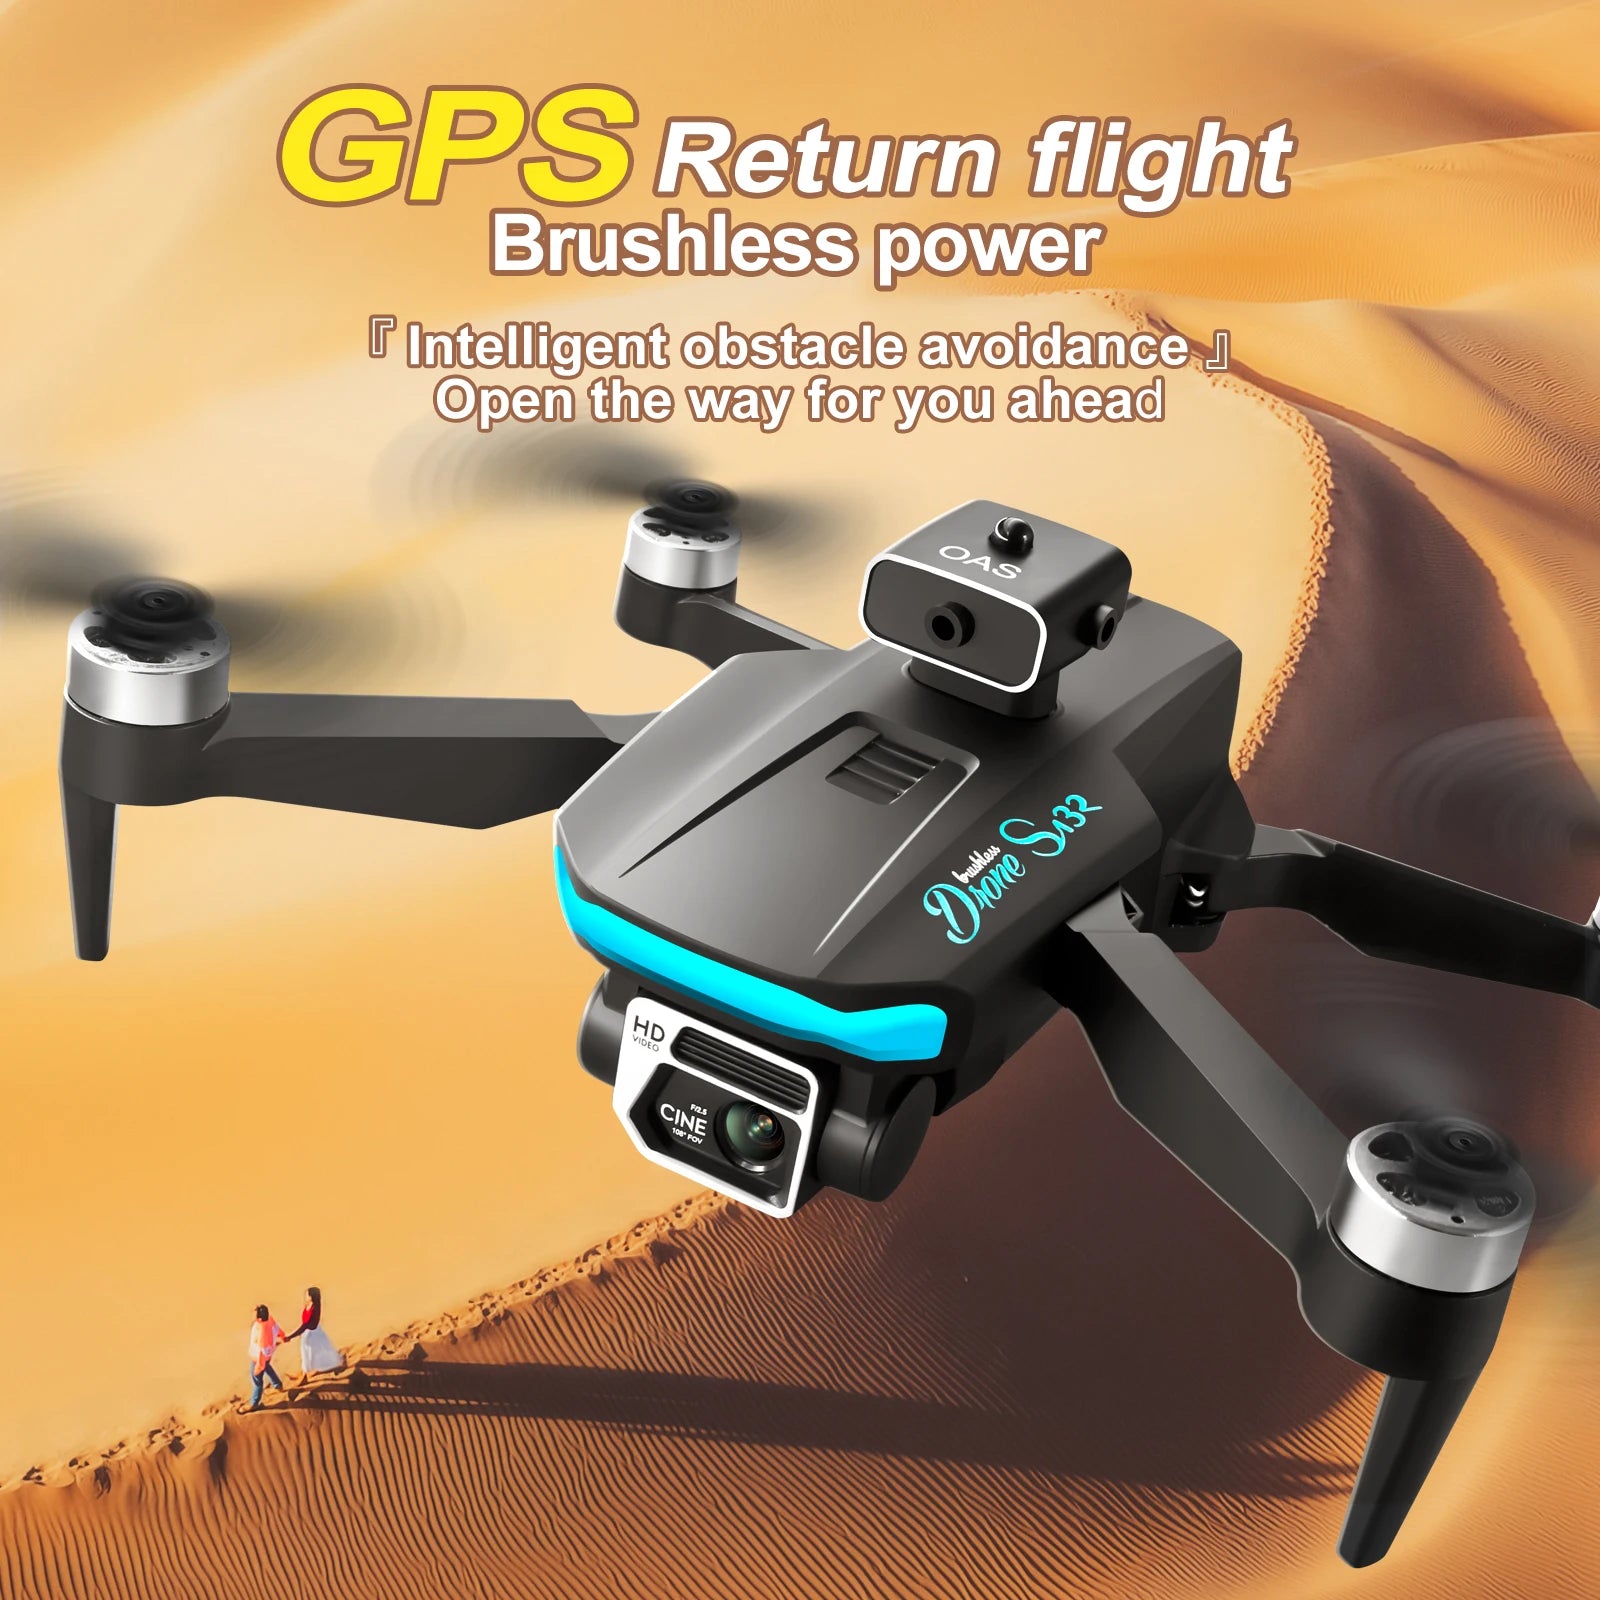 S132 Drone, gps: intelligent obstacle avoidance @pen the way for